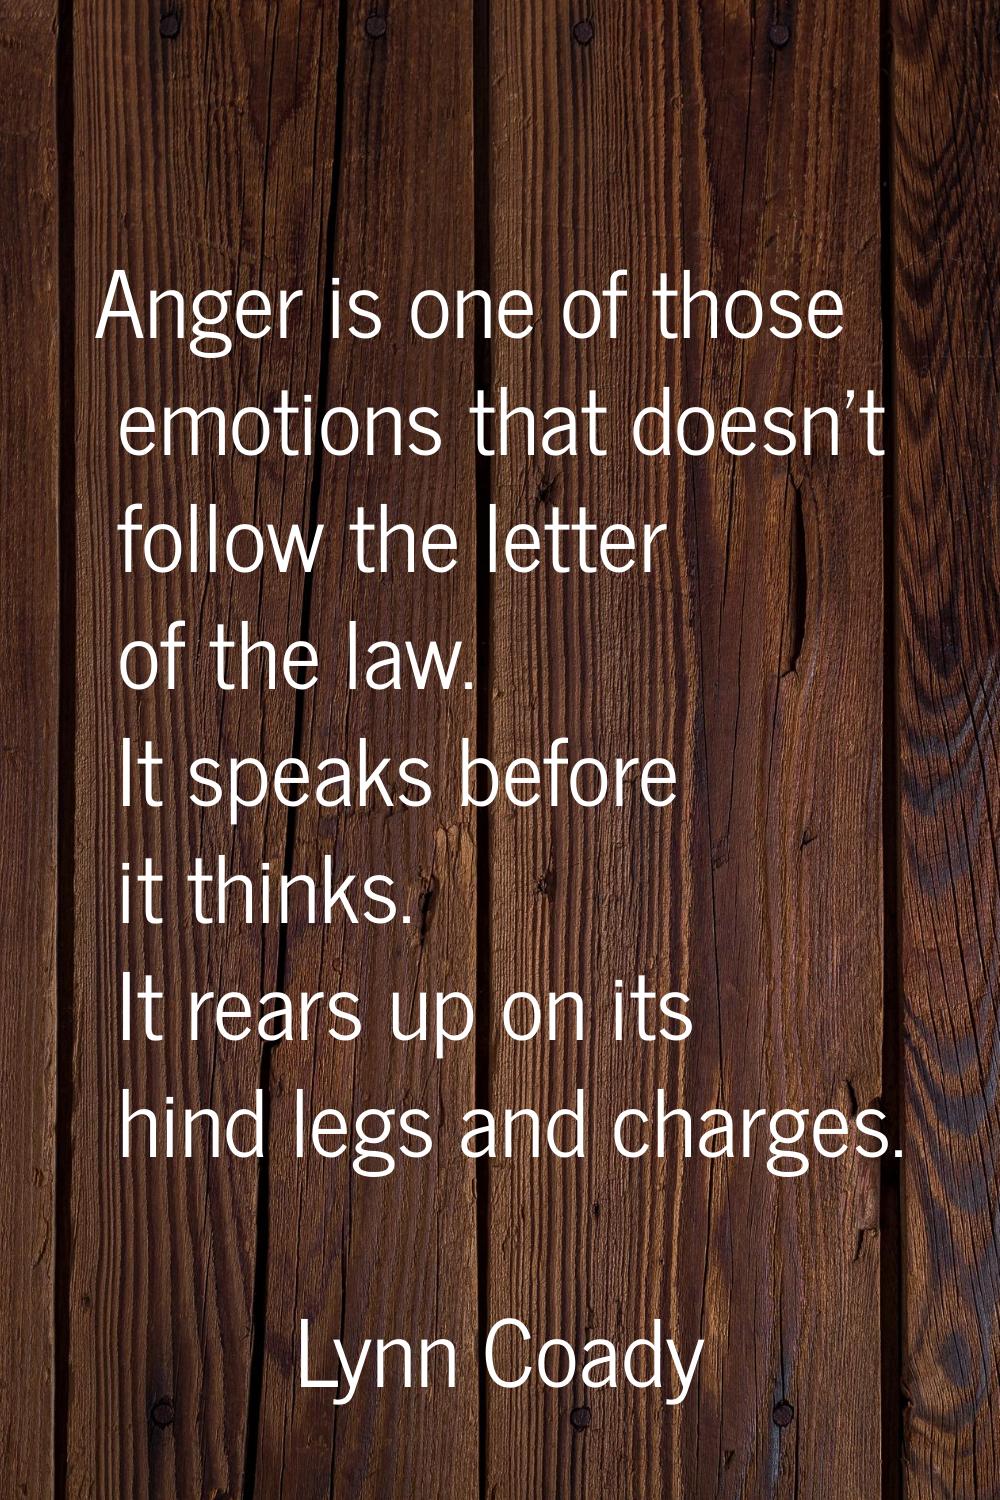 Anger is one of those emotions that doesn't follow the letter of the law. It speaks before it think